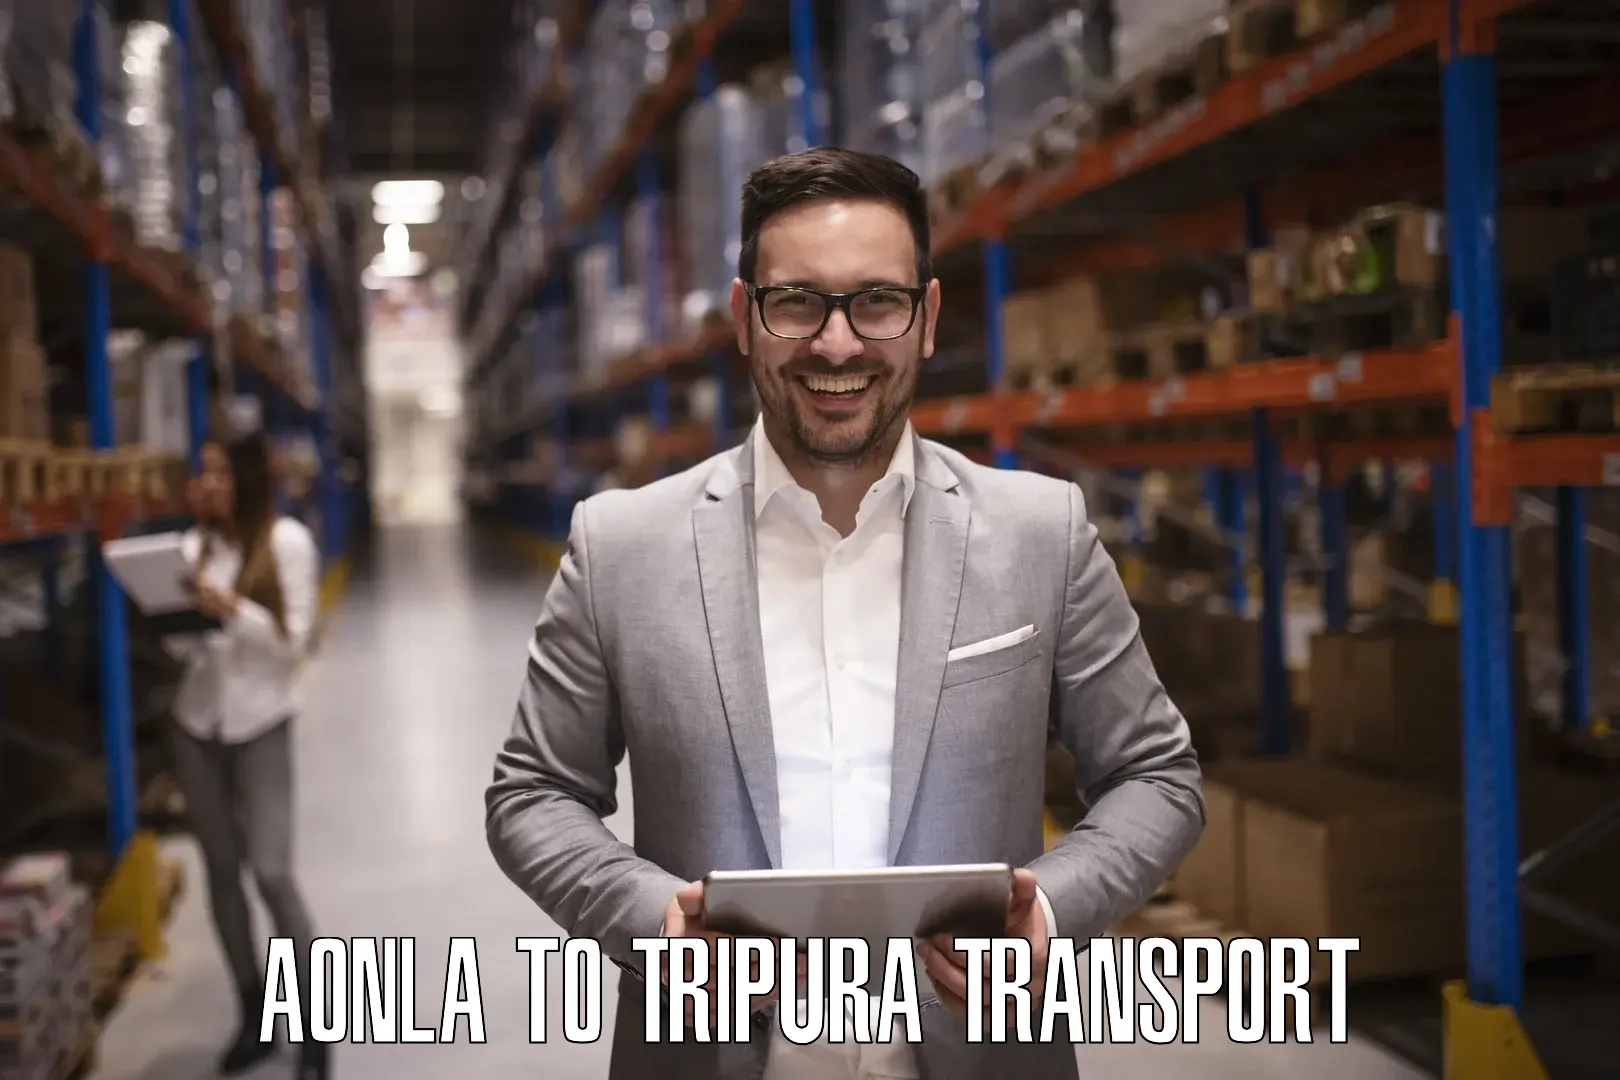 Road transport online services Aonla to Tripura